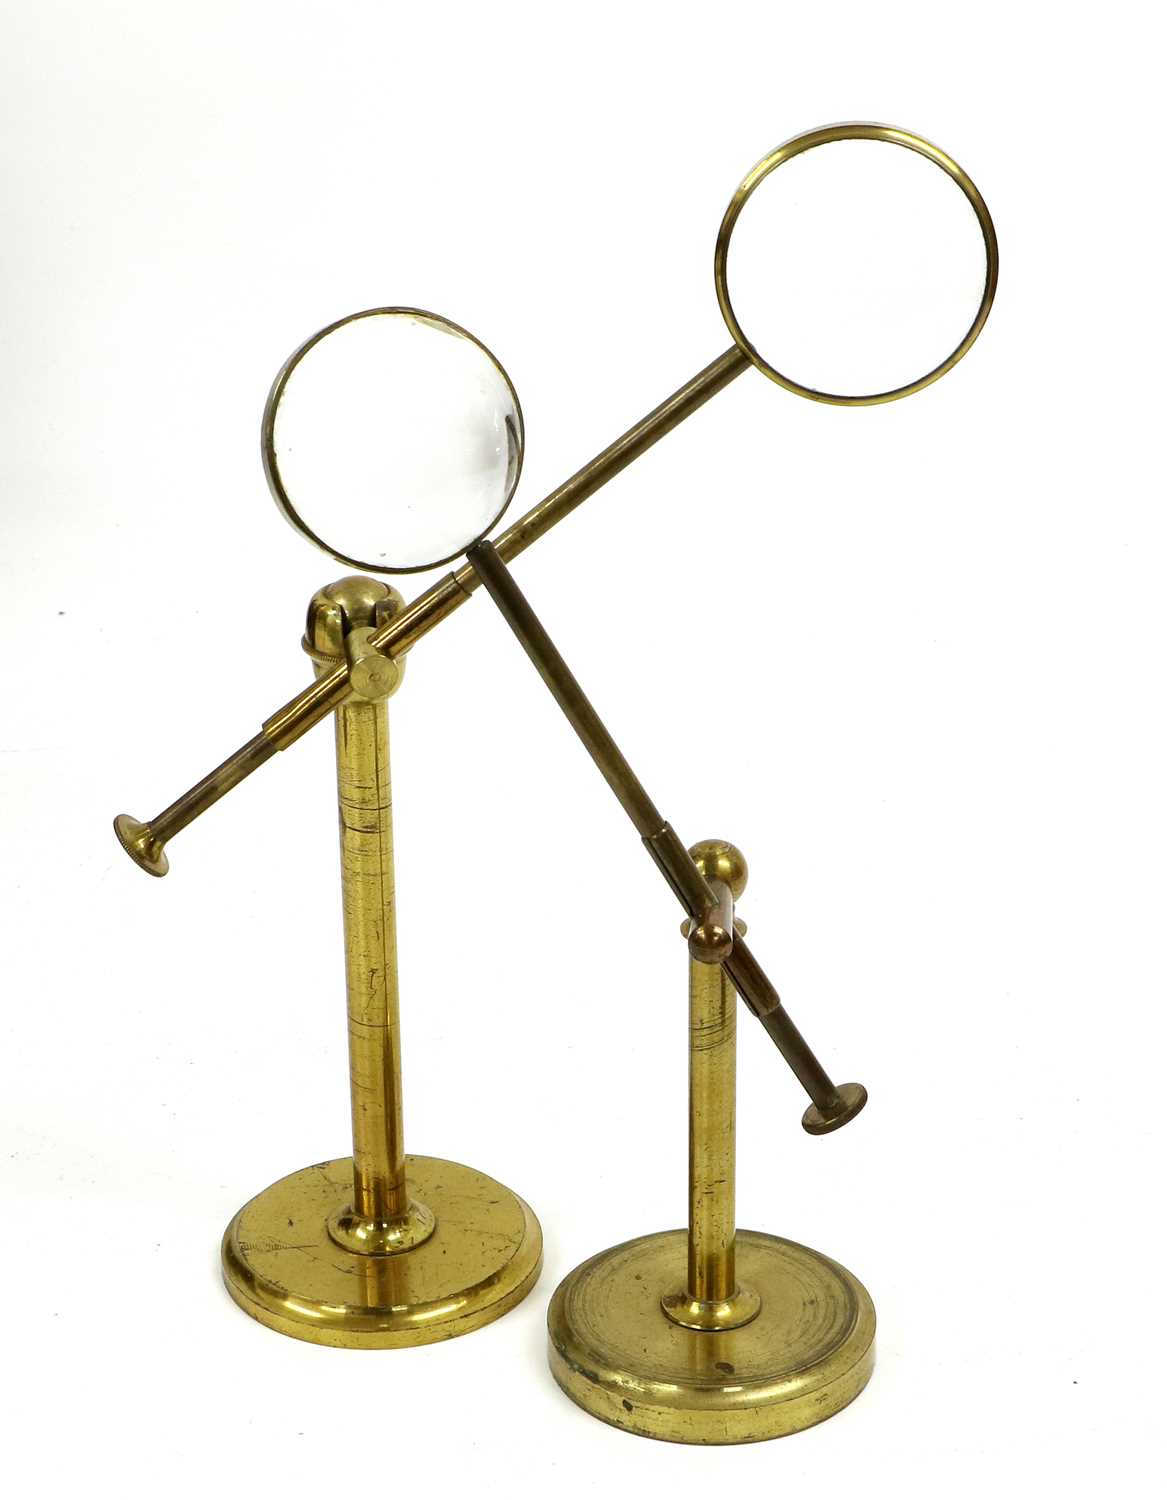 A Victorian Brass Bull's Eye Desk Magnifying Glass, of cantilever form wth gimbal hinge and circular